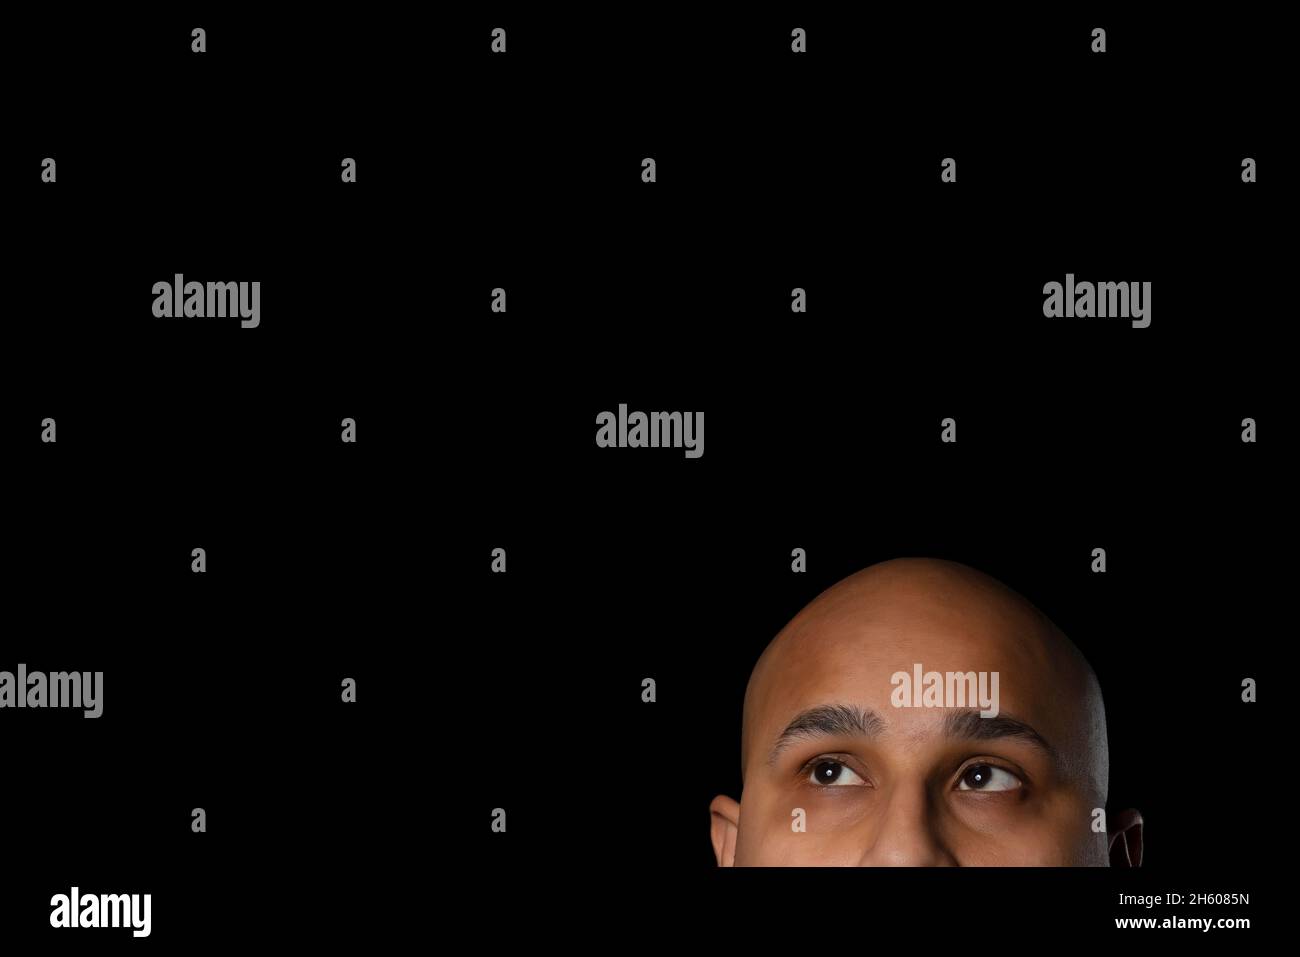 The shaved head and eyes of a bald man looking up against black background. Stock Photo